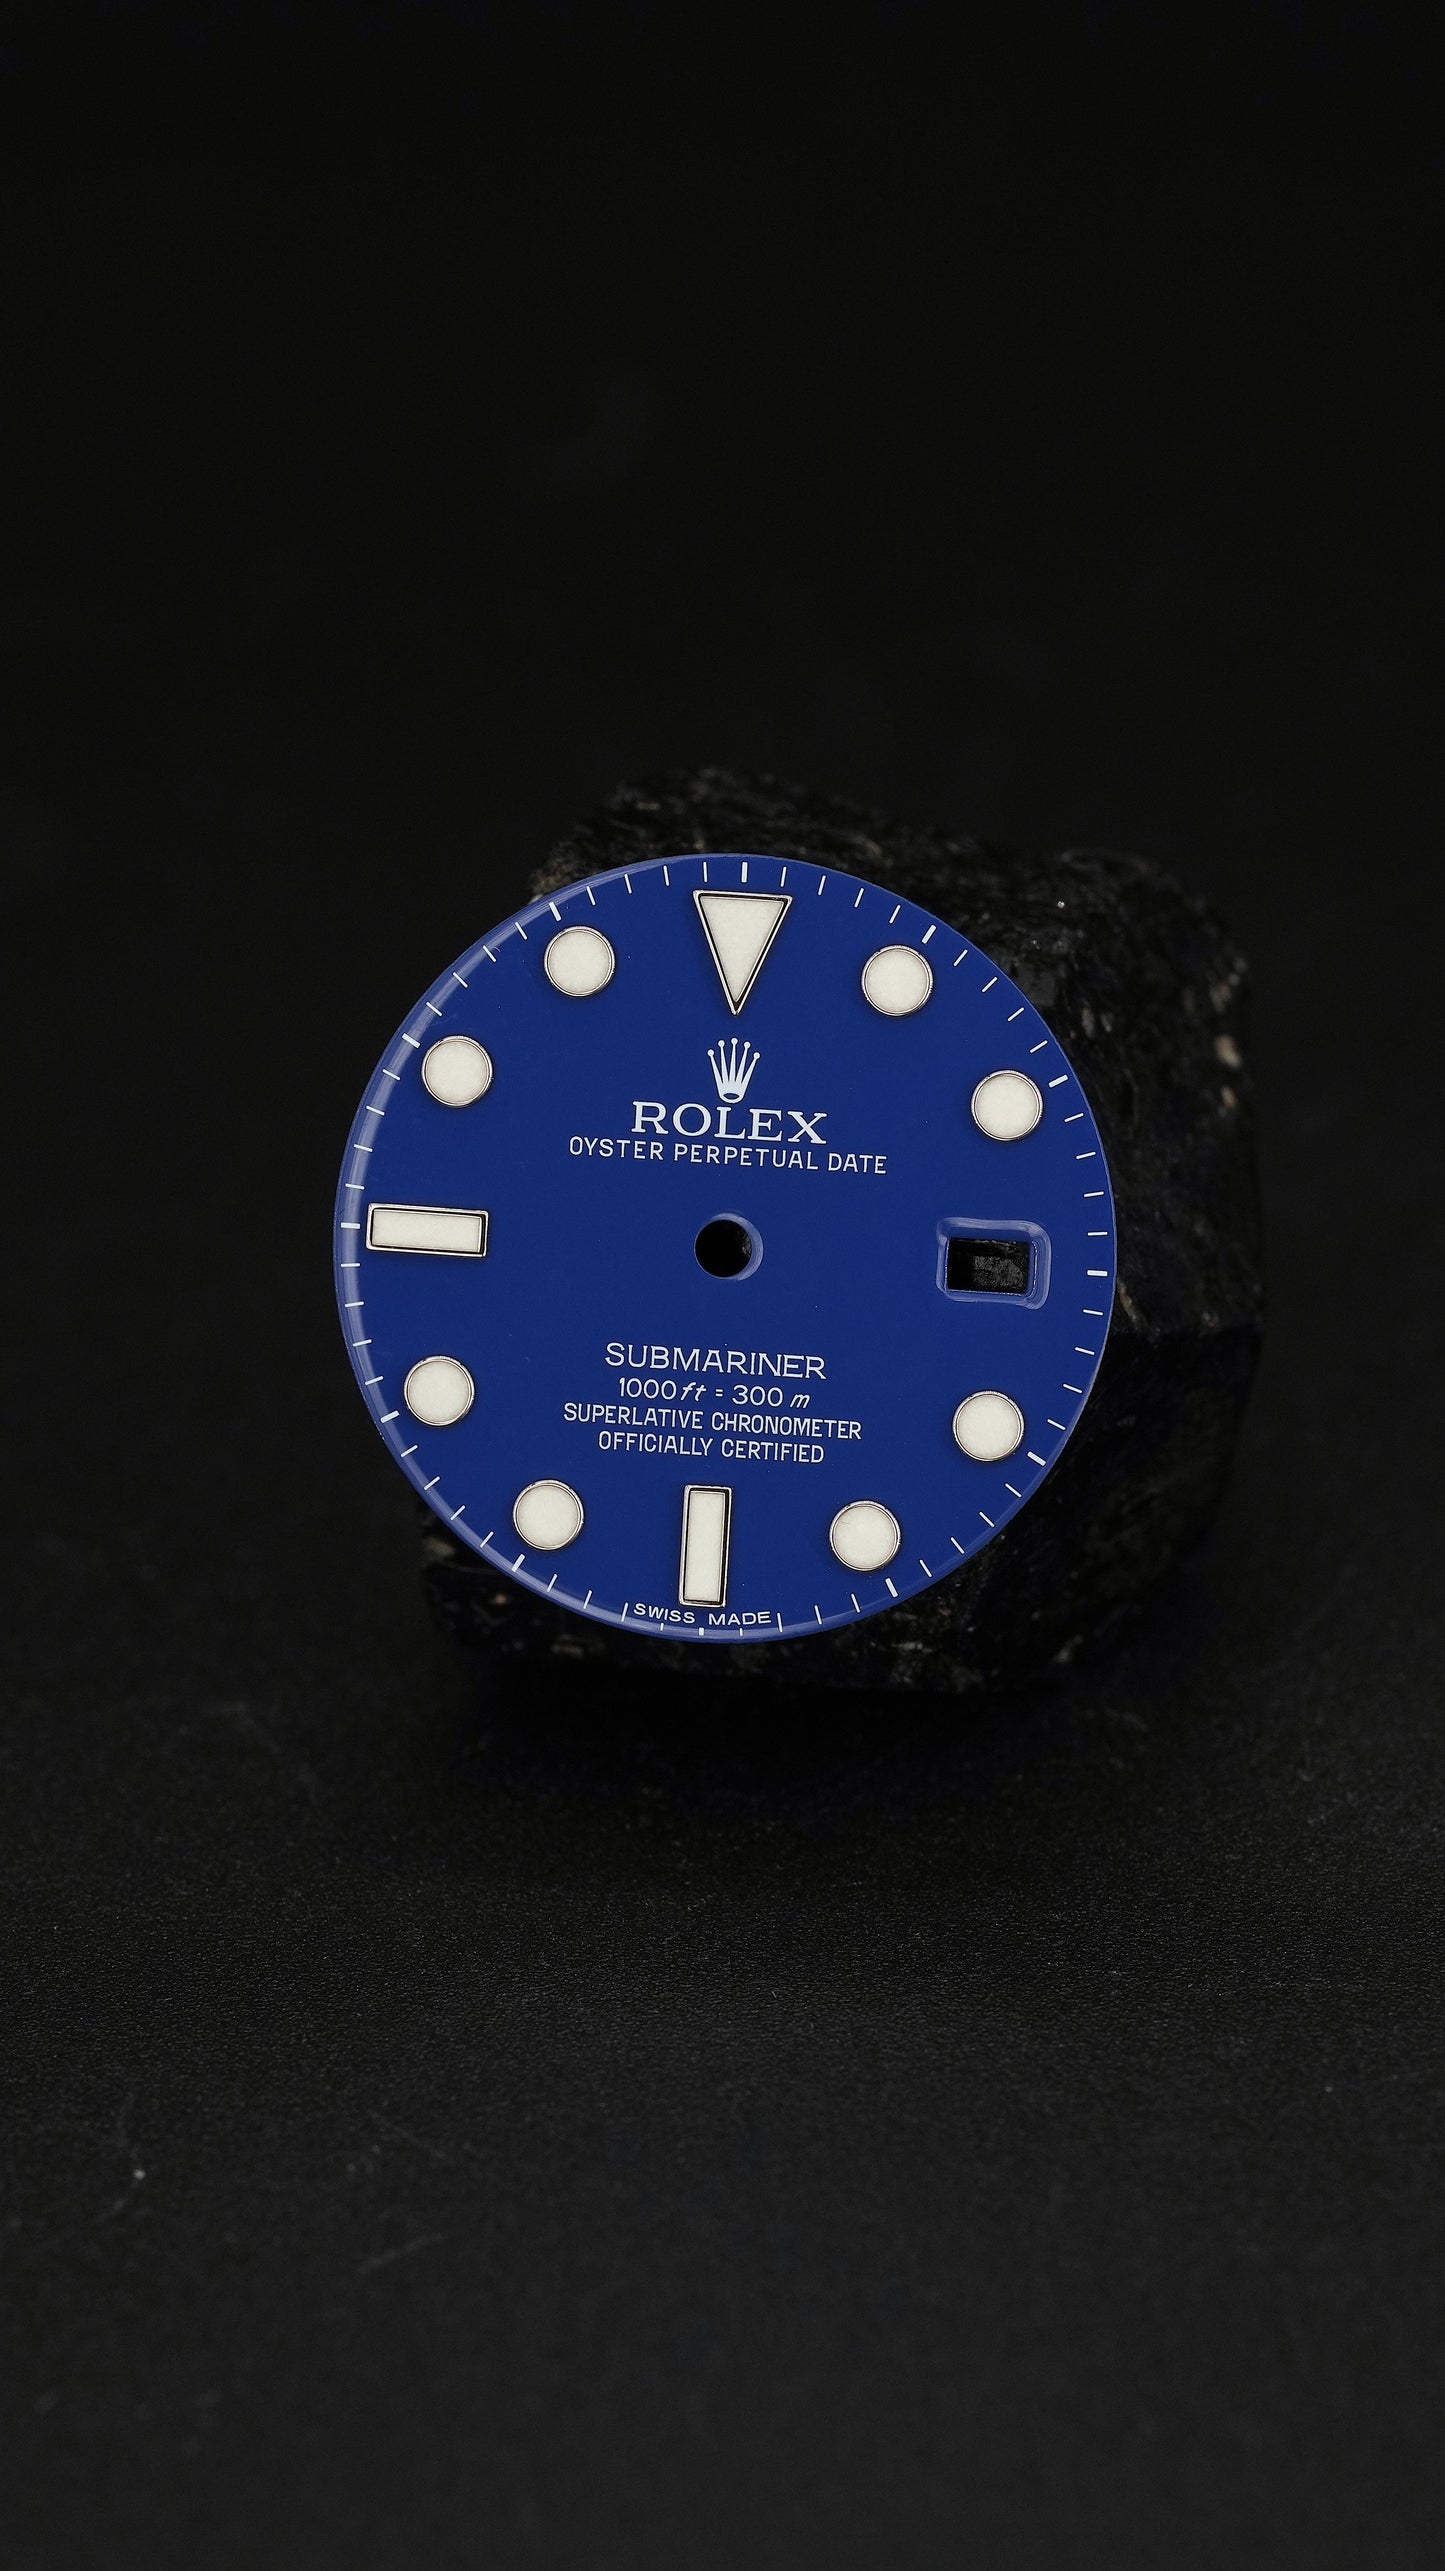 Rolex blue Dial for the Submariner 116619 LB